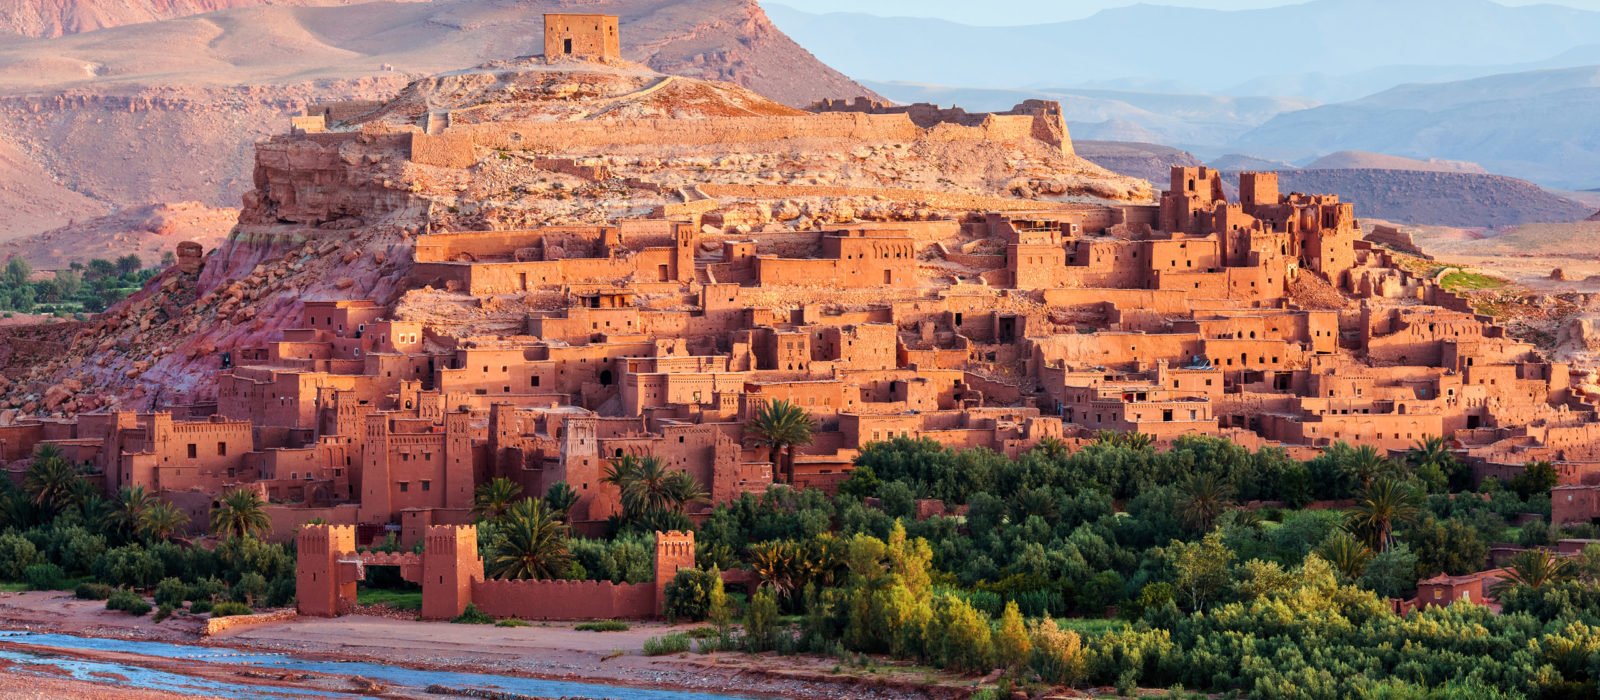 View of Aït Ben Haddou at dawn - an ancient red city in Morocco, North Africa